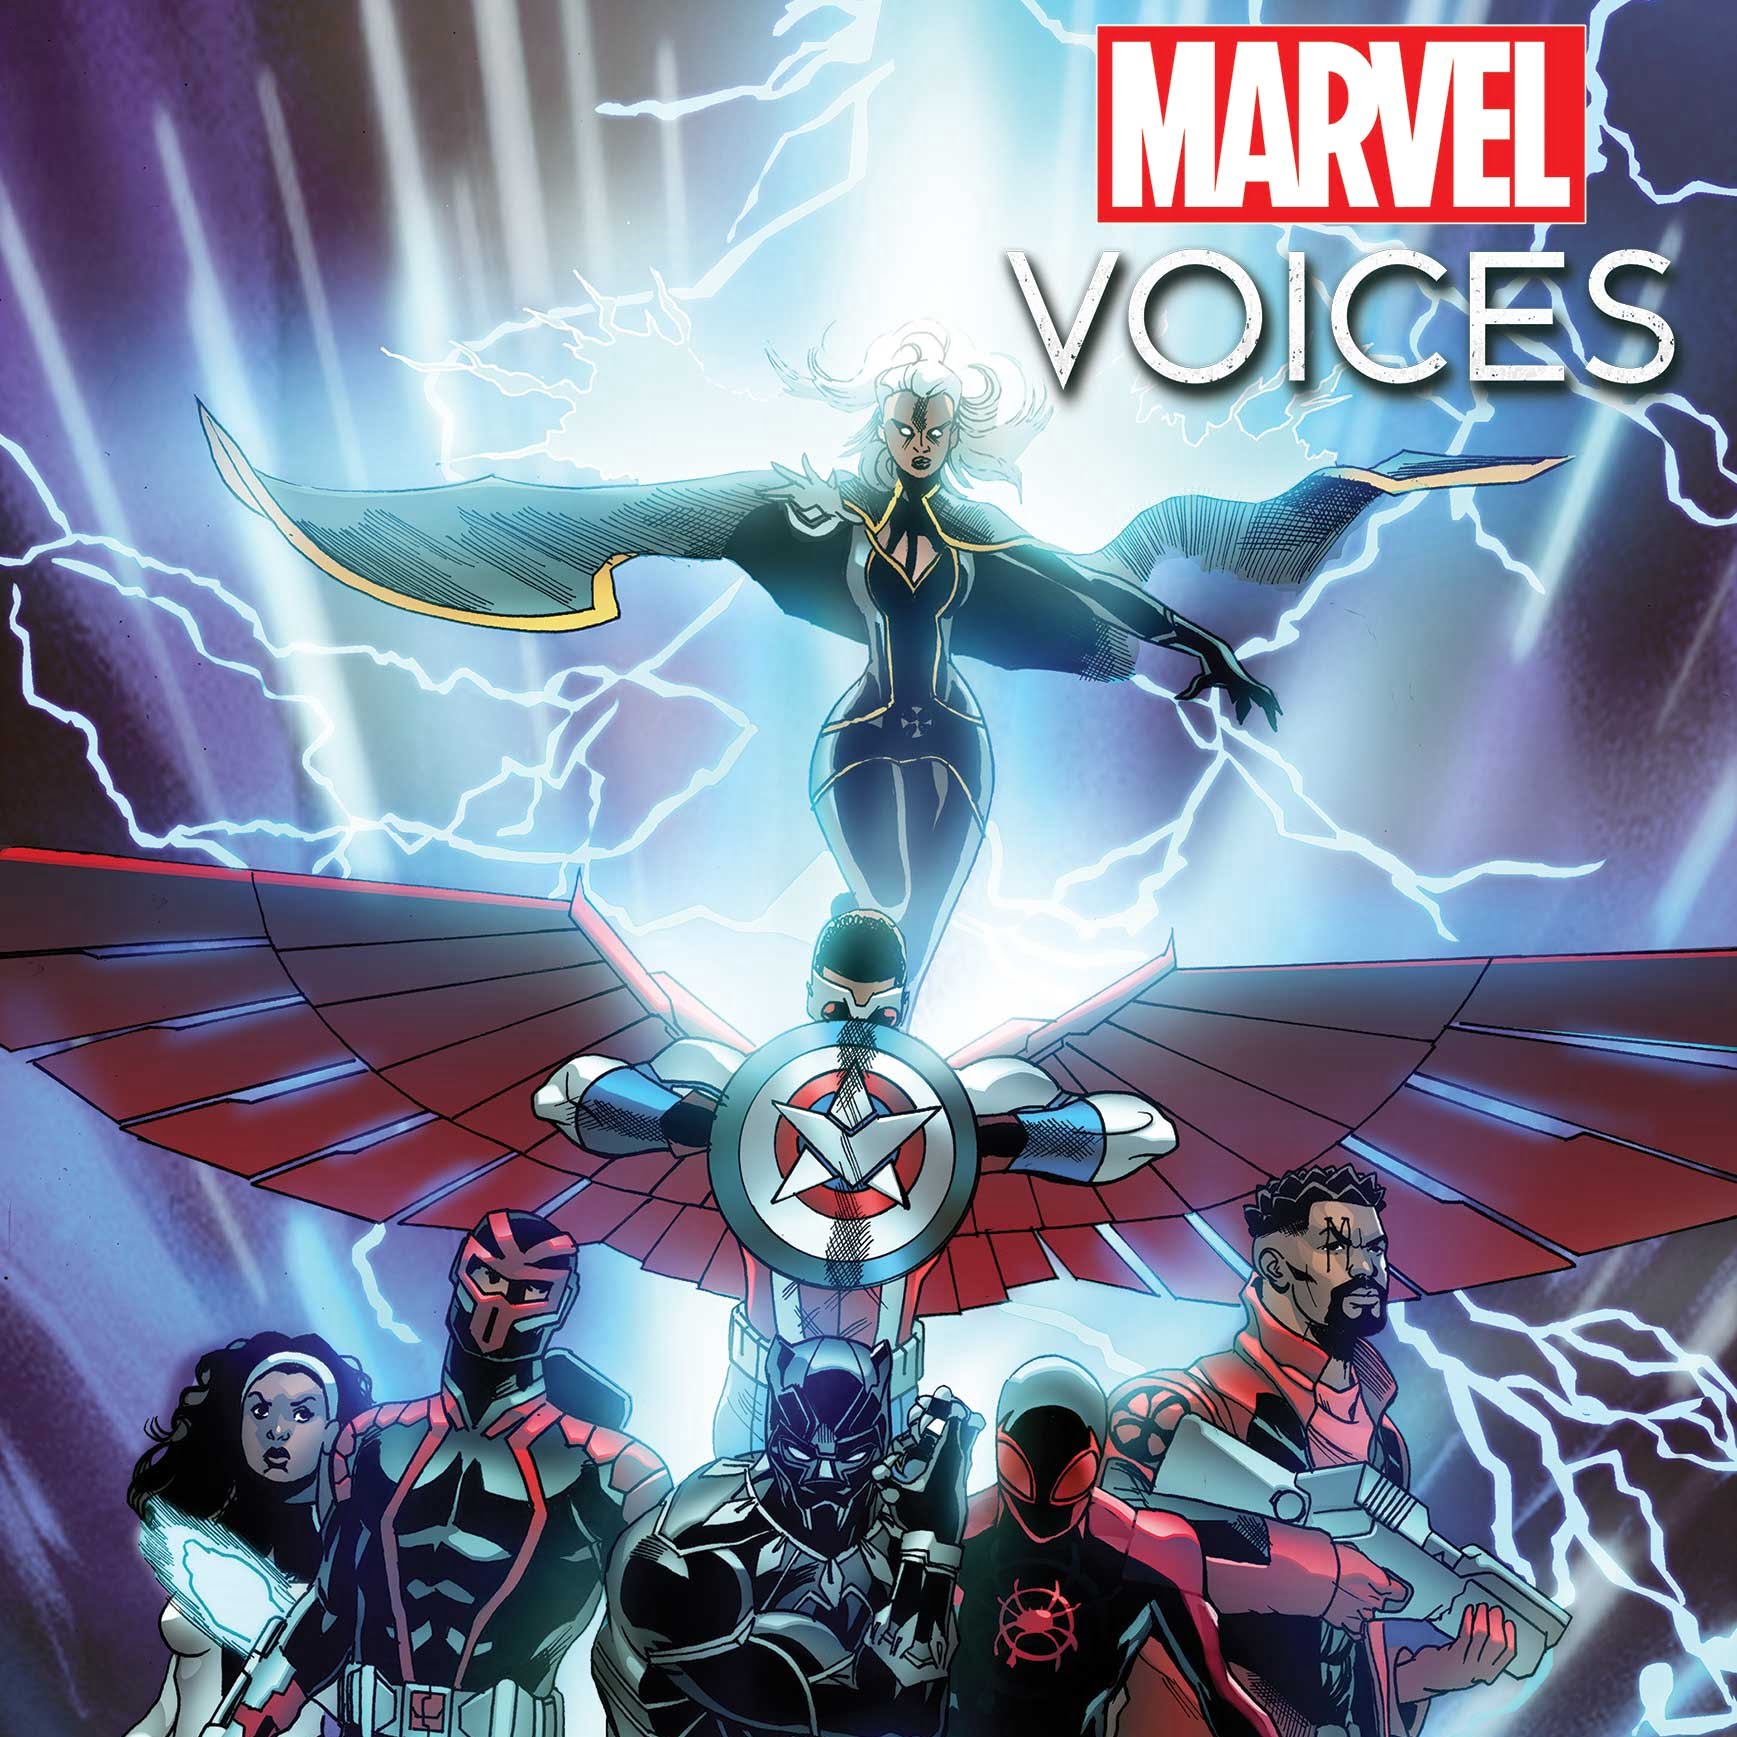 Marvel's Voices: Legacy via Crisscross for Marvel Comics for use by 360 Magazine